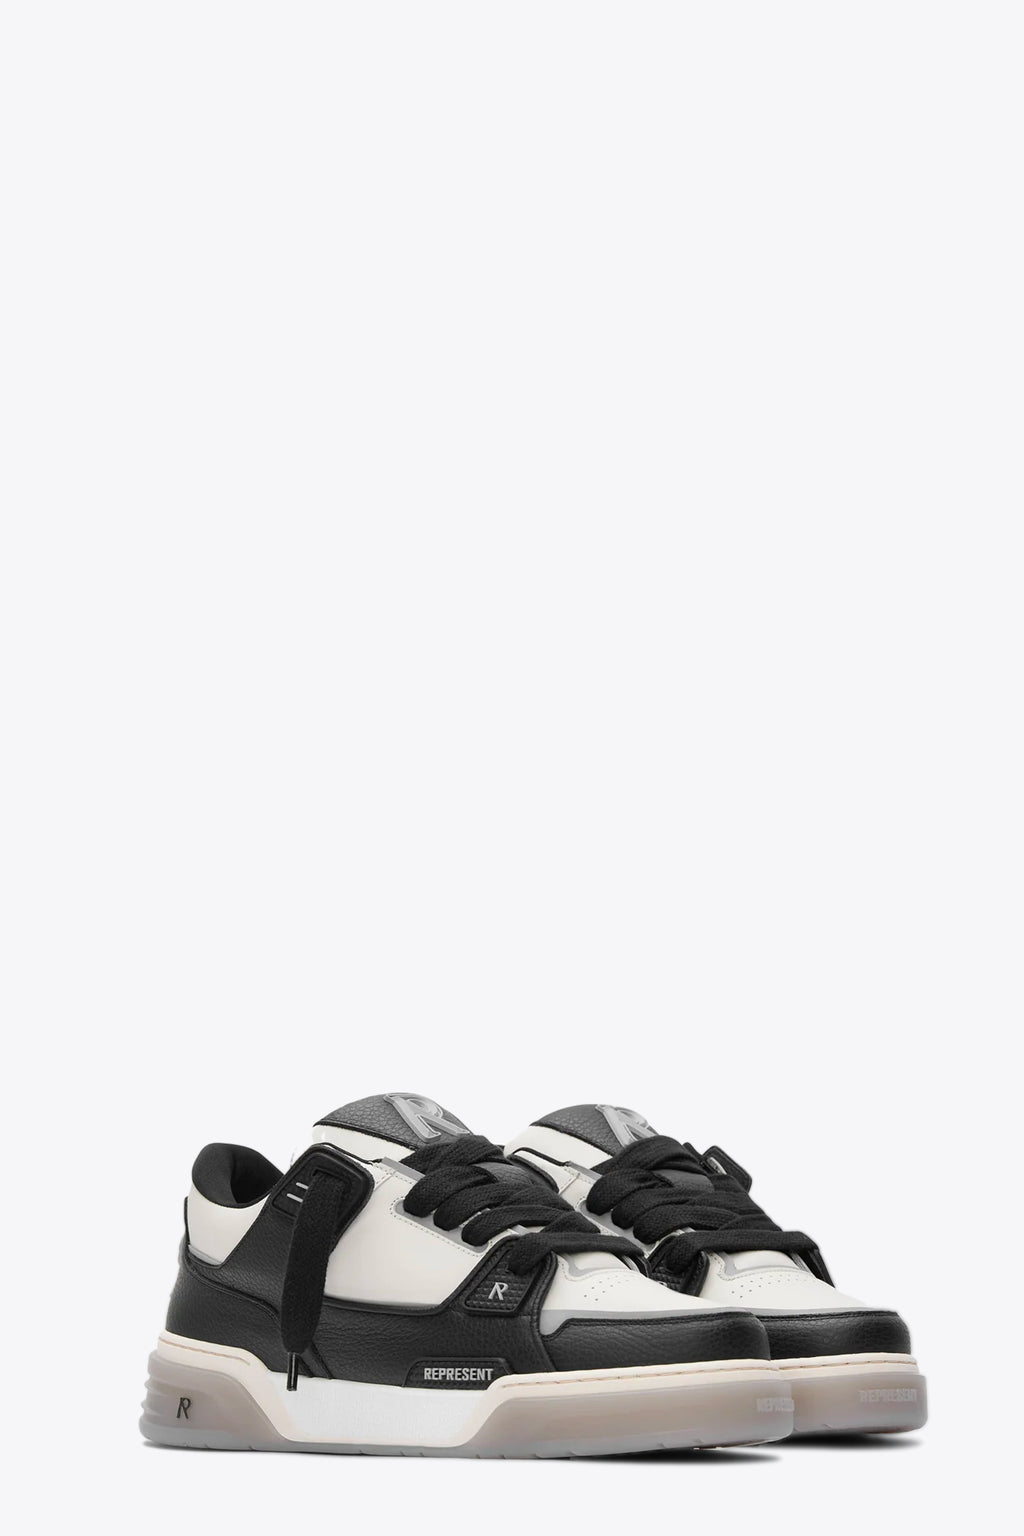 alt-image__Off-white-and-black-leather-low-chunky-sneaker---Studio-sneaker